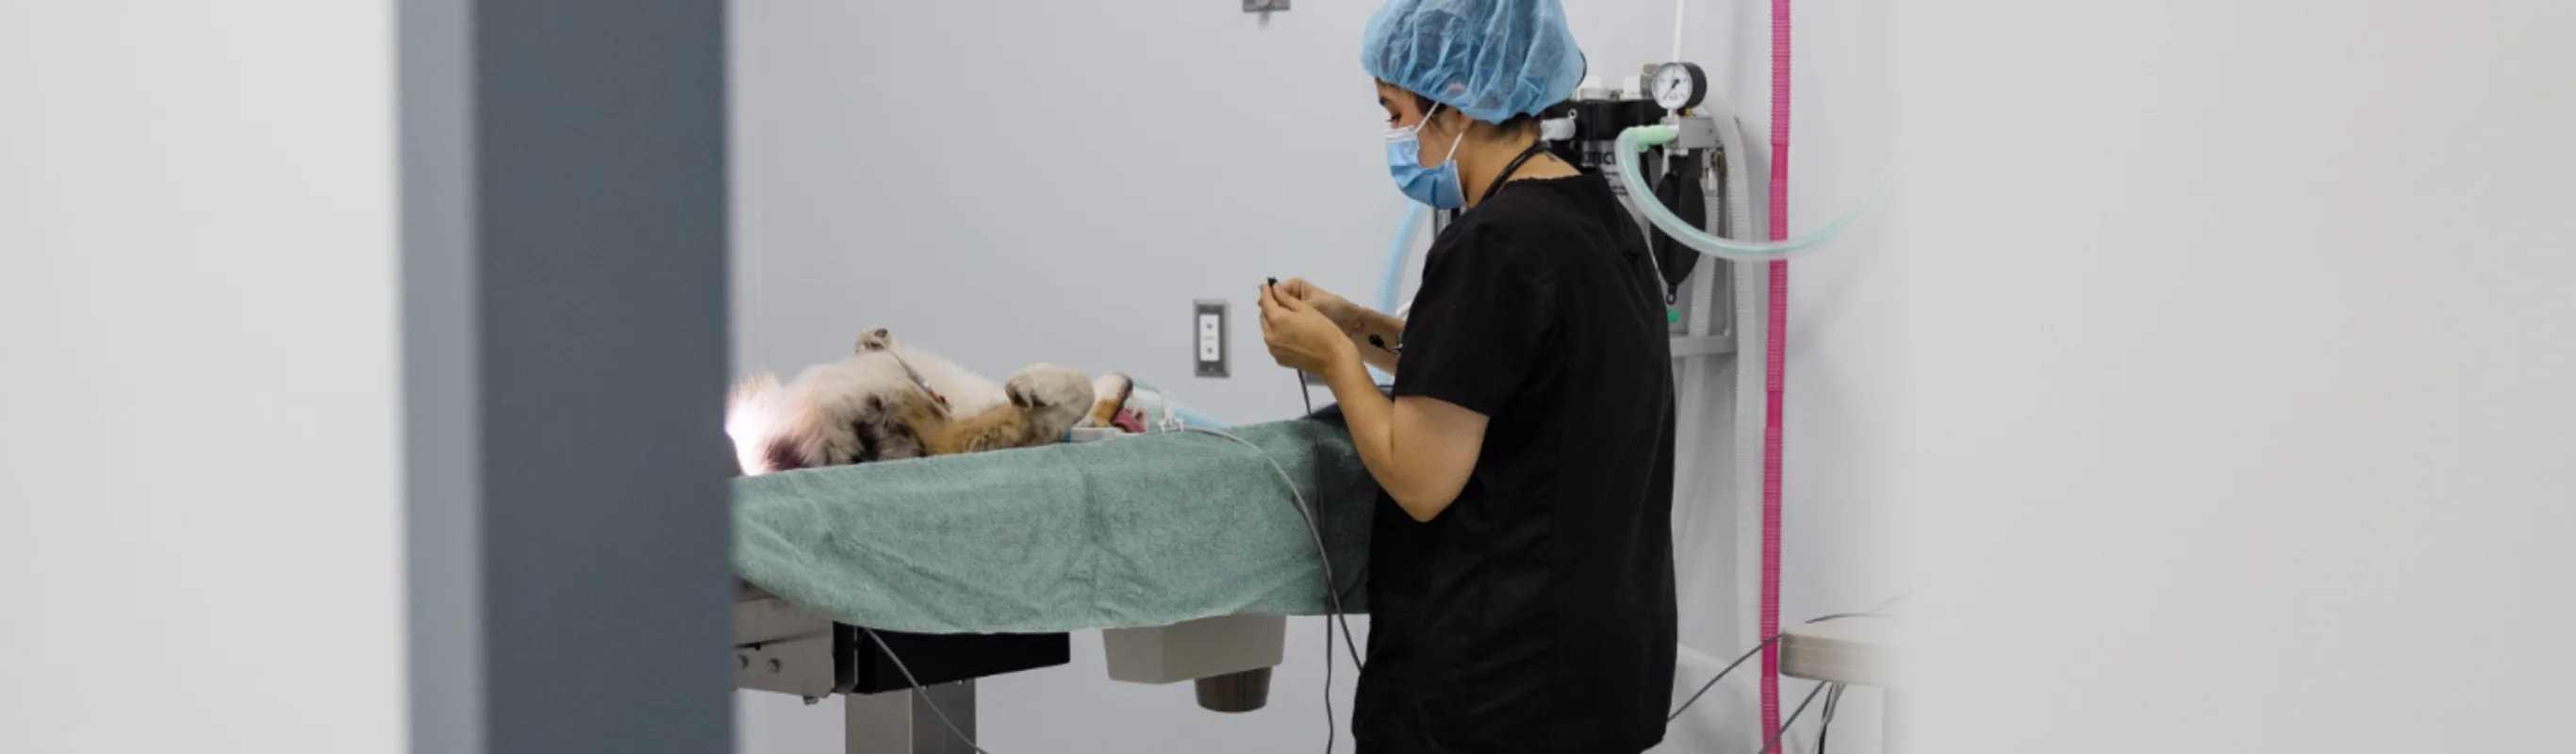 Staff member caring for a dog on an operating table